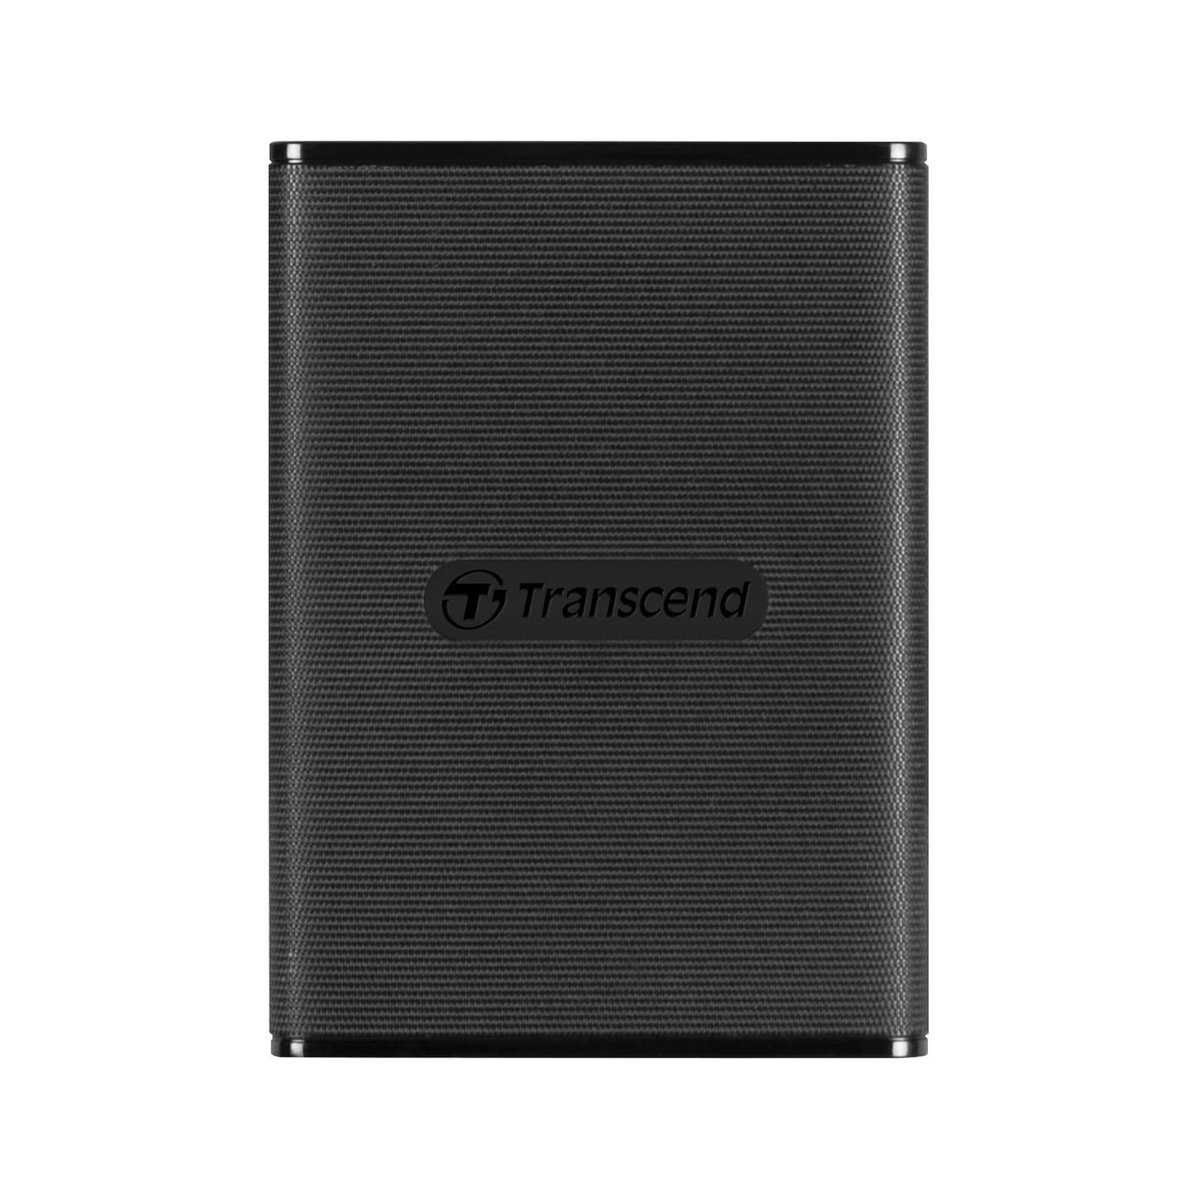 Transcend 250GB USB 3.1 Gen 2 USB Type-C ESD270C Portable Solid State Drive